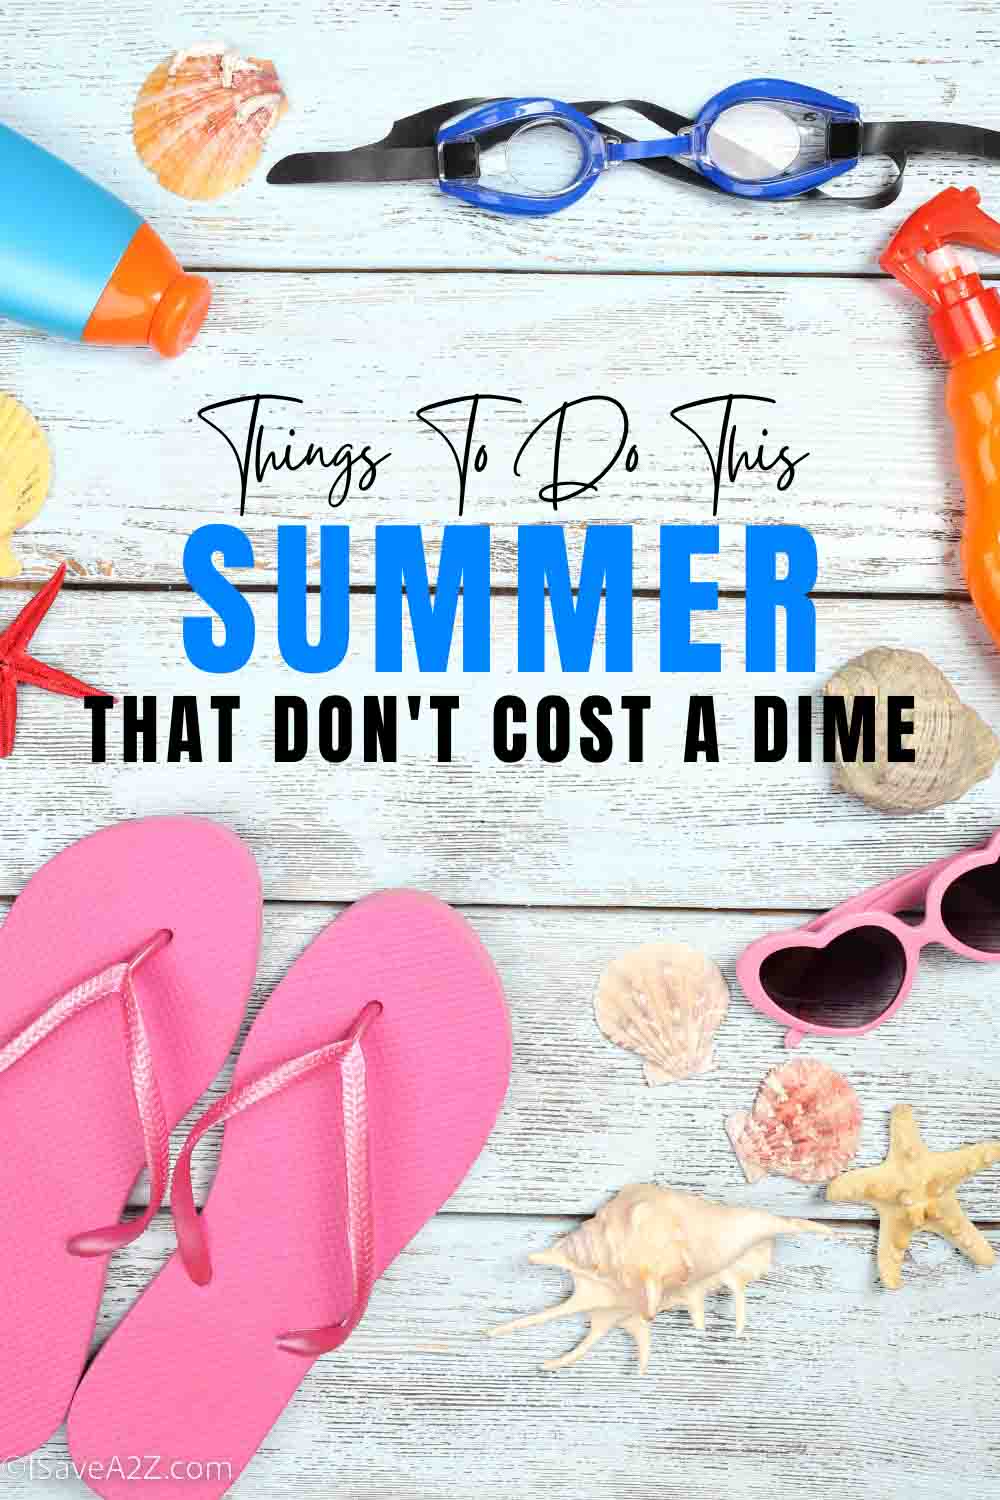 15 Things To Do With Your Kids This Summer That Don’t Cost A Dime